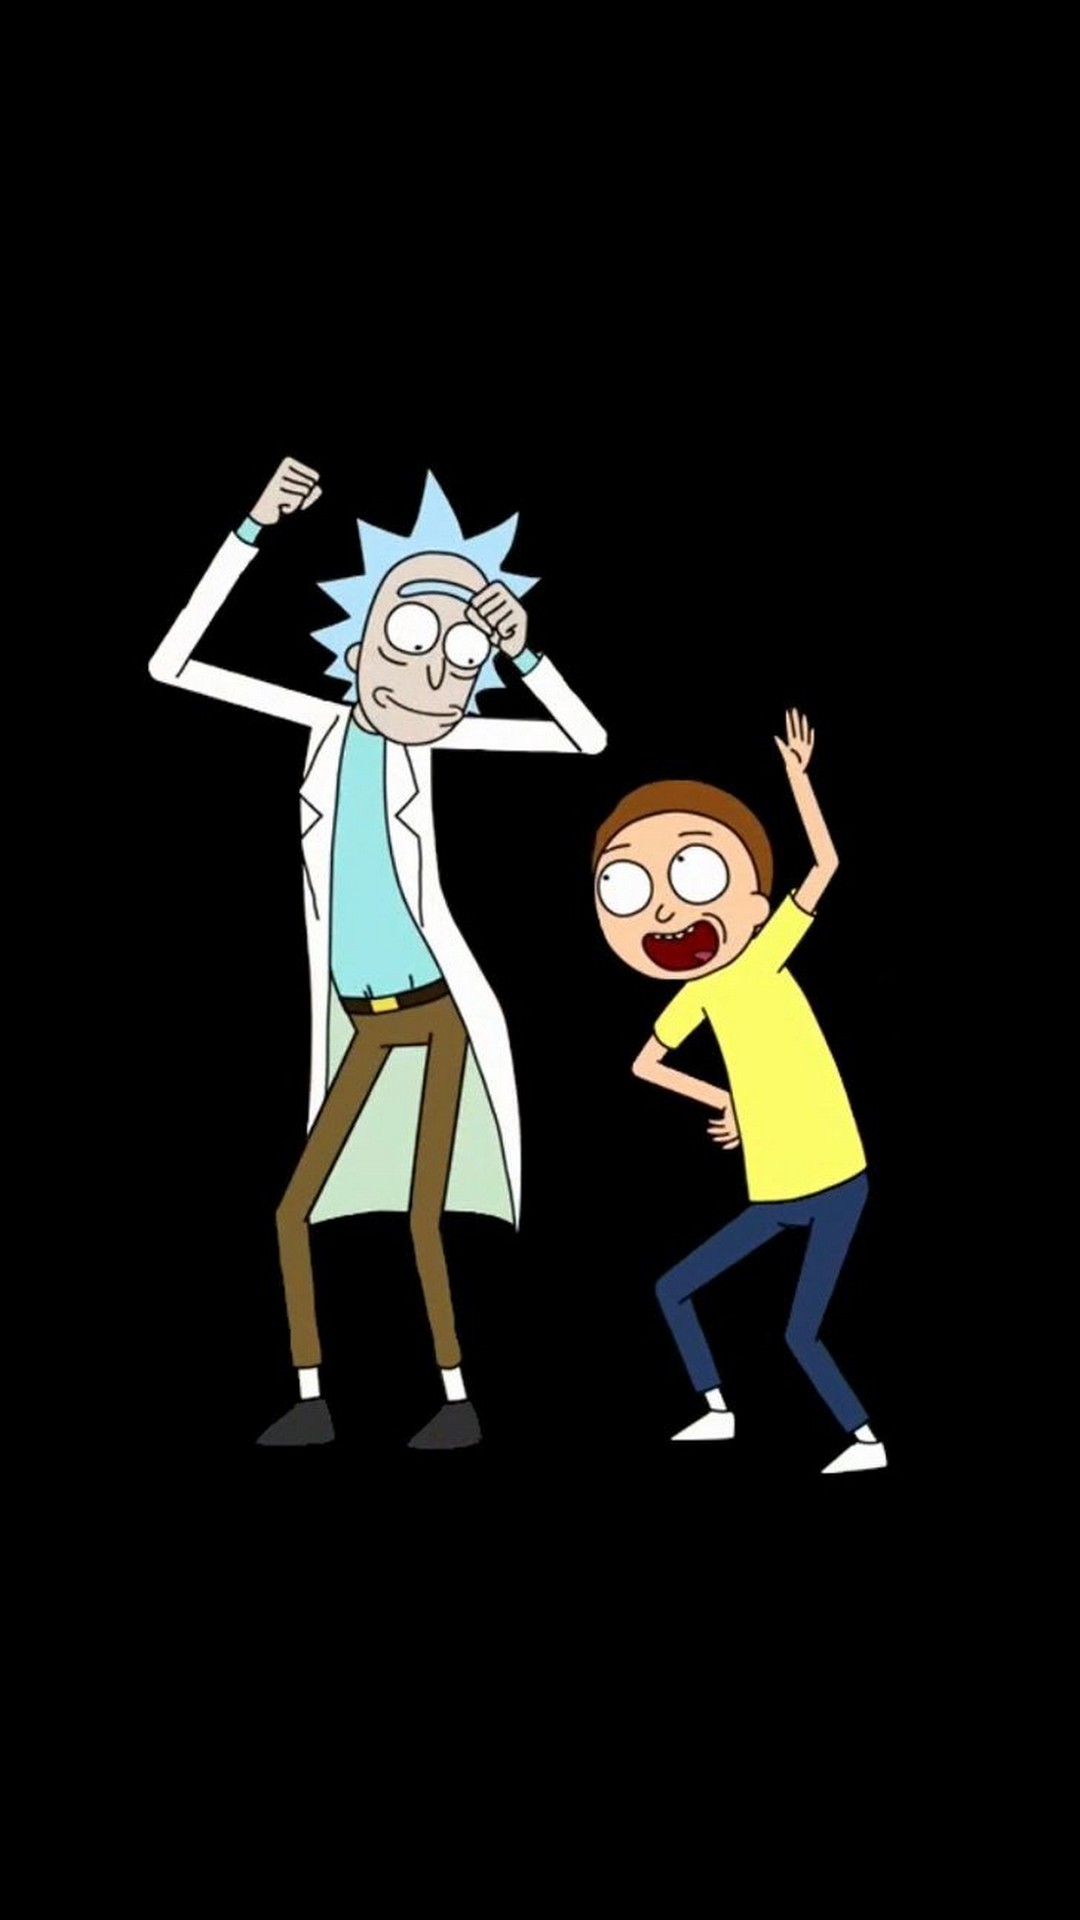 Cool Rick And Morty iPhone Wallpaper resolution 1080x1920